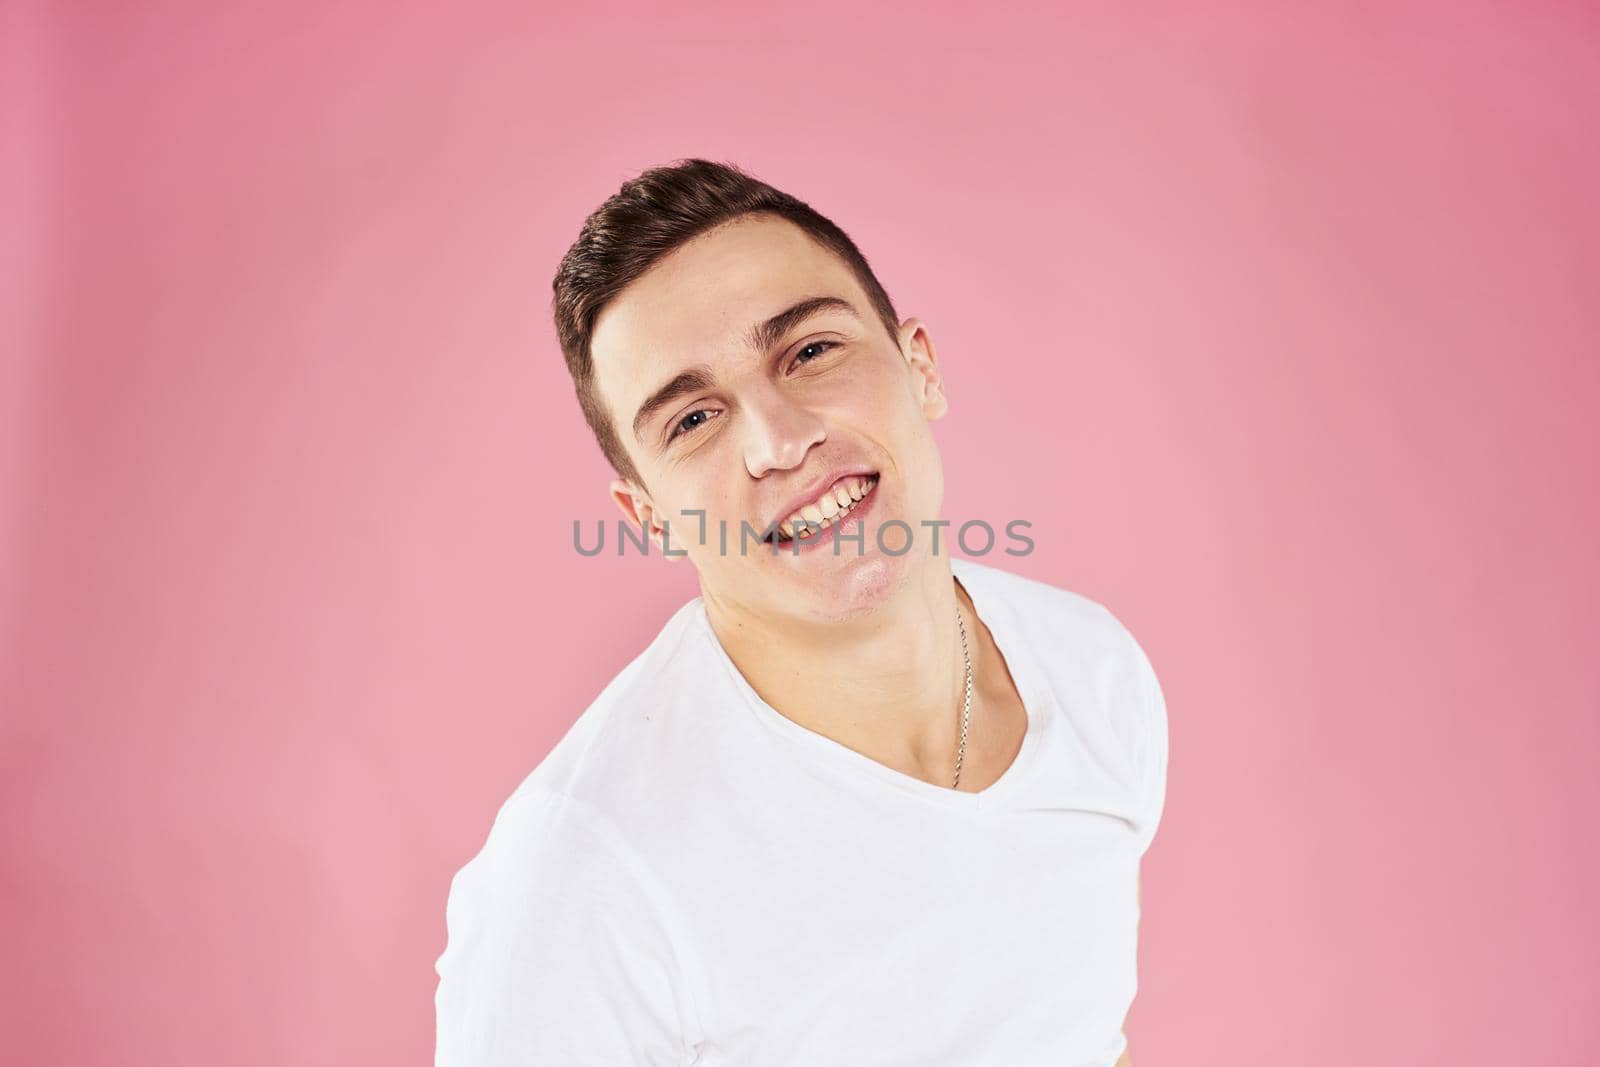 A man in a white t-shirt gestures with his hands emotions pink background studio cropped view. High quality photo